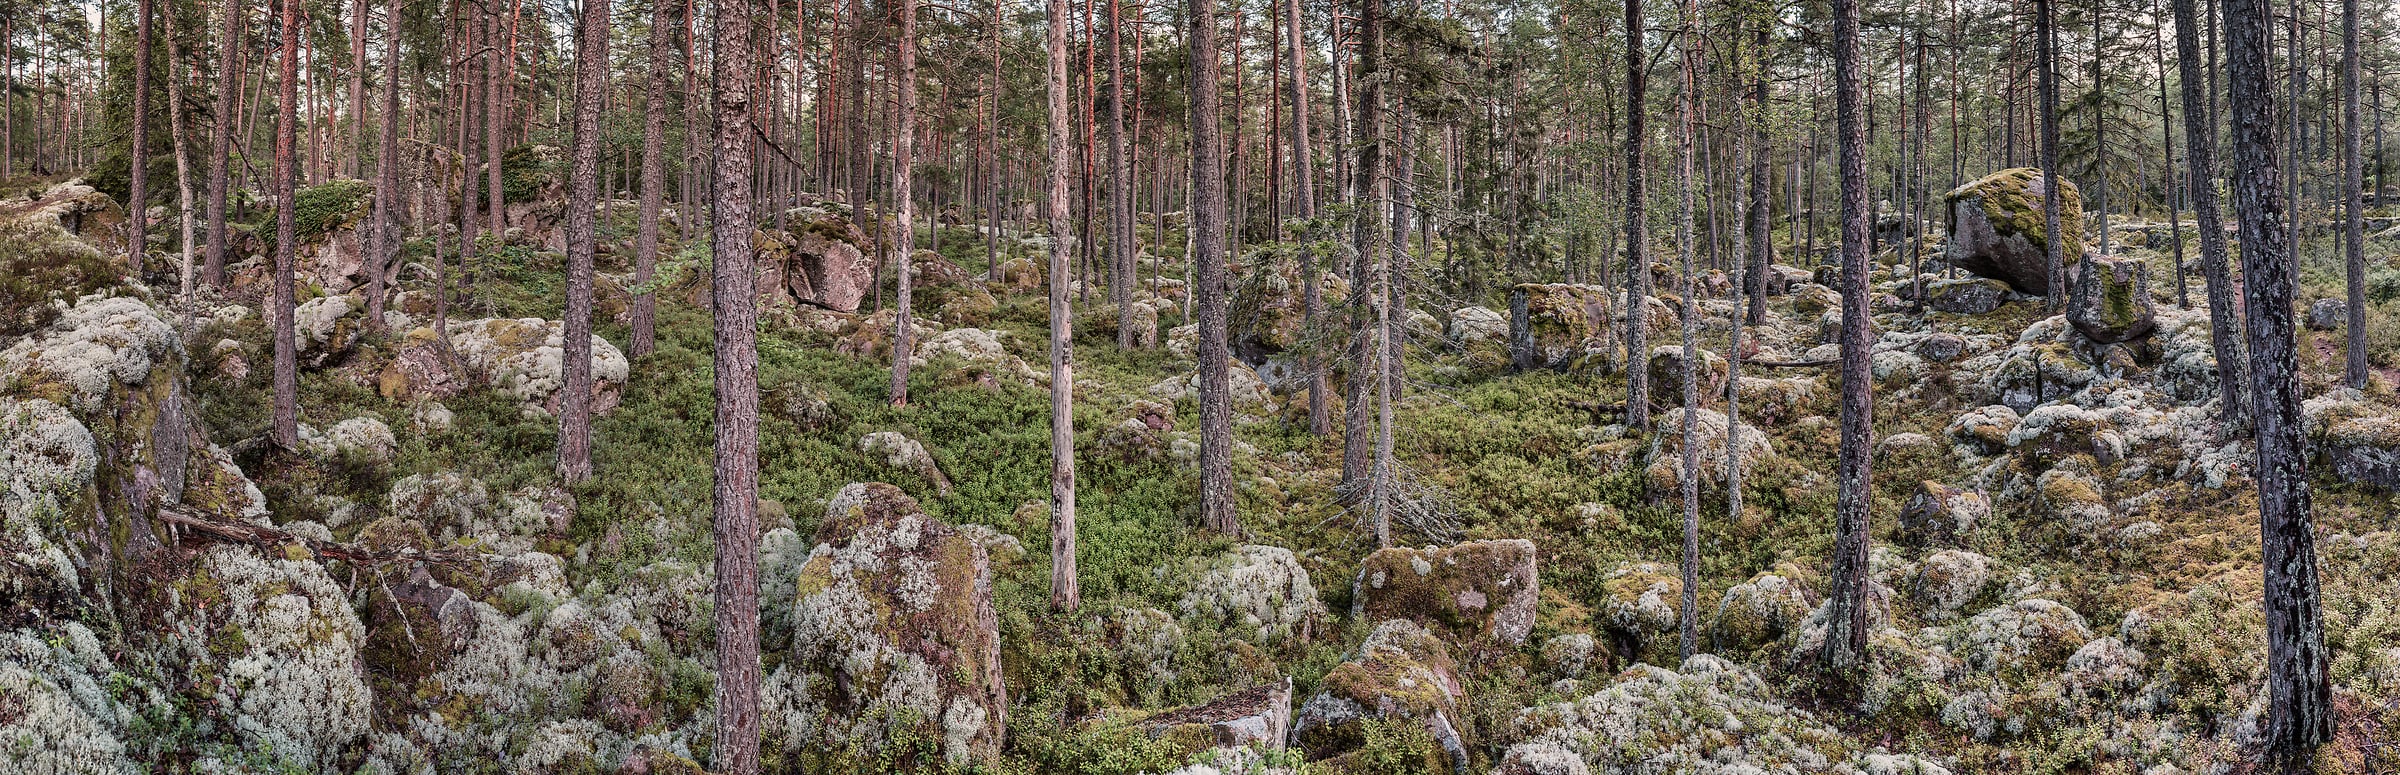 2,548 megapixels! A very high resolution wallpaper photo of a forest; nature photograph created by Alfred Feil in Stora Hammarsjoen, Kallersbo, Smaland, Sweden.